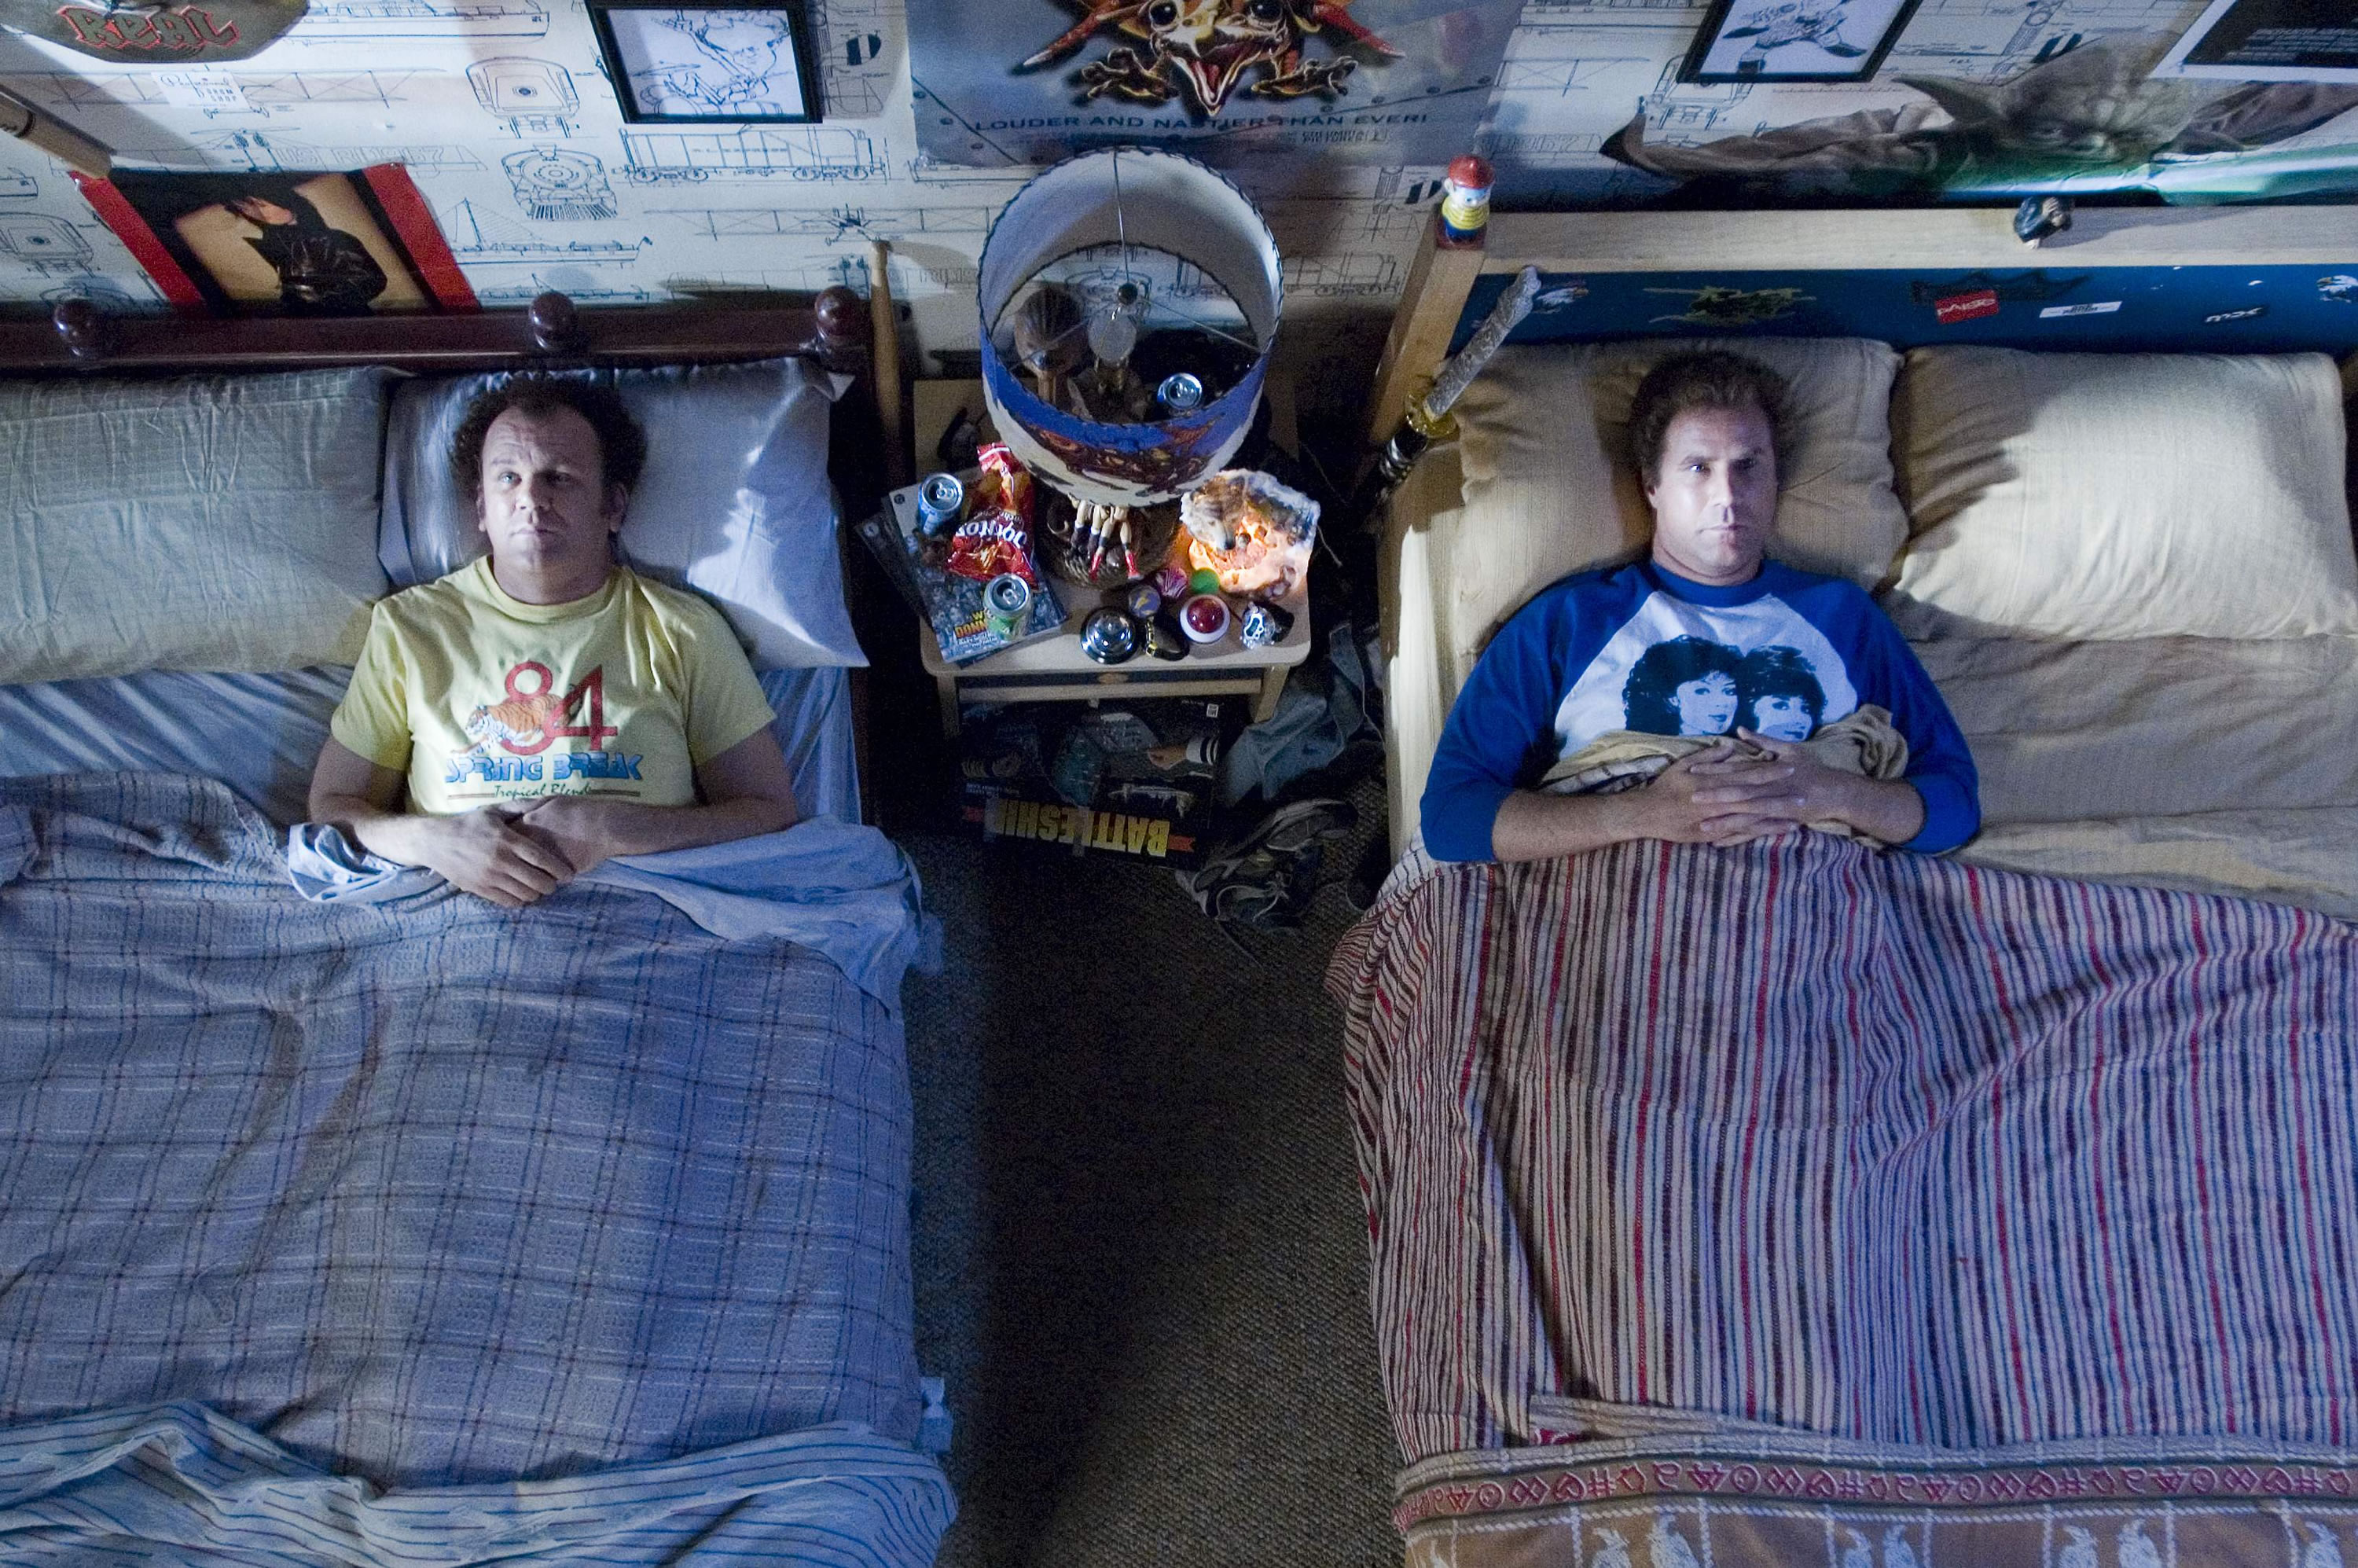 John C. Reilly (left) and Will Ferrell (right) star in Columbia Pictures' comedy STEP BROTHERS.